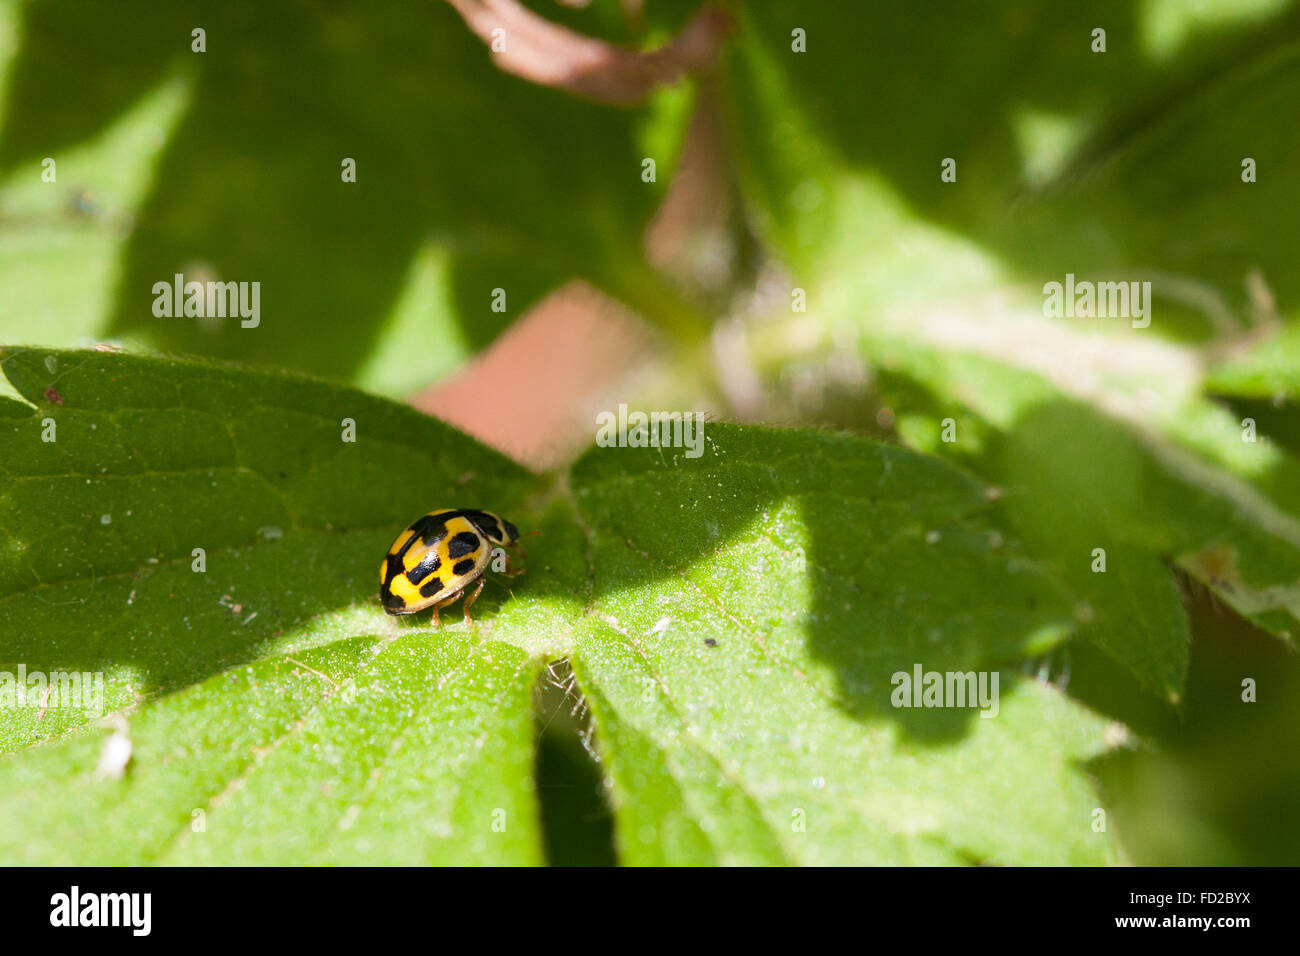 #30DaysWild day 24, found this little yellow ladybird scurrying around the undergrowth.  This is Propylea 14-punctata, the 14-sp Stock Photo